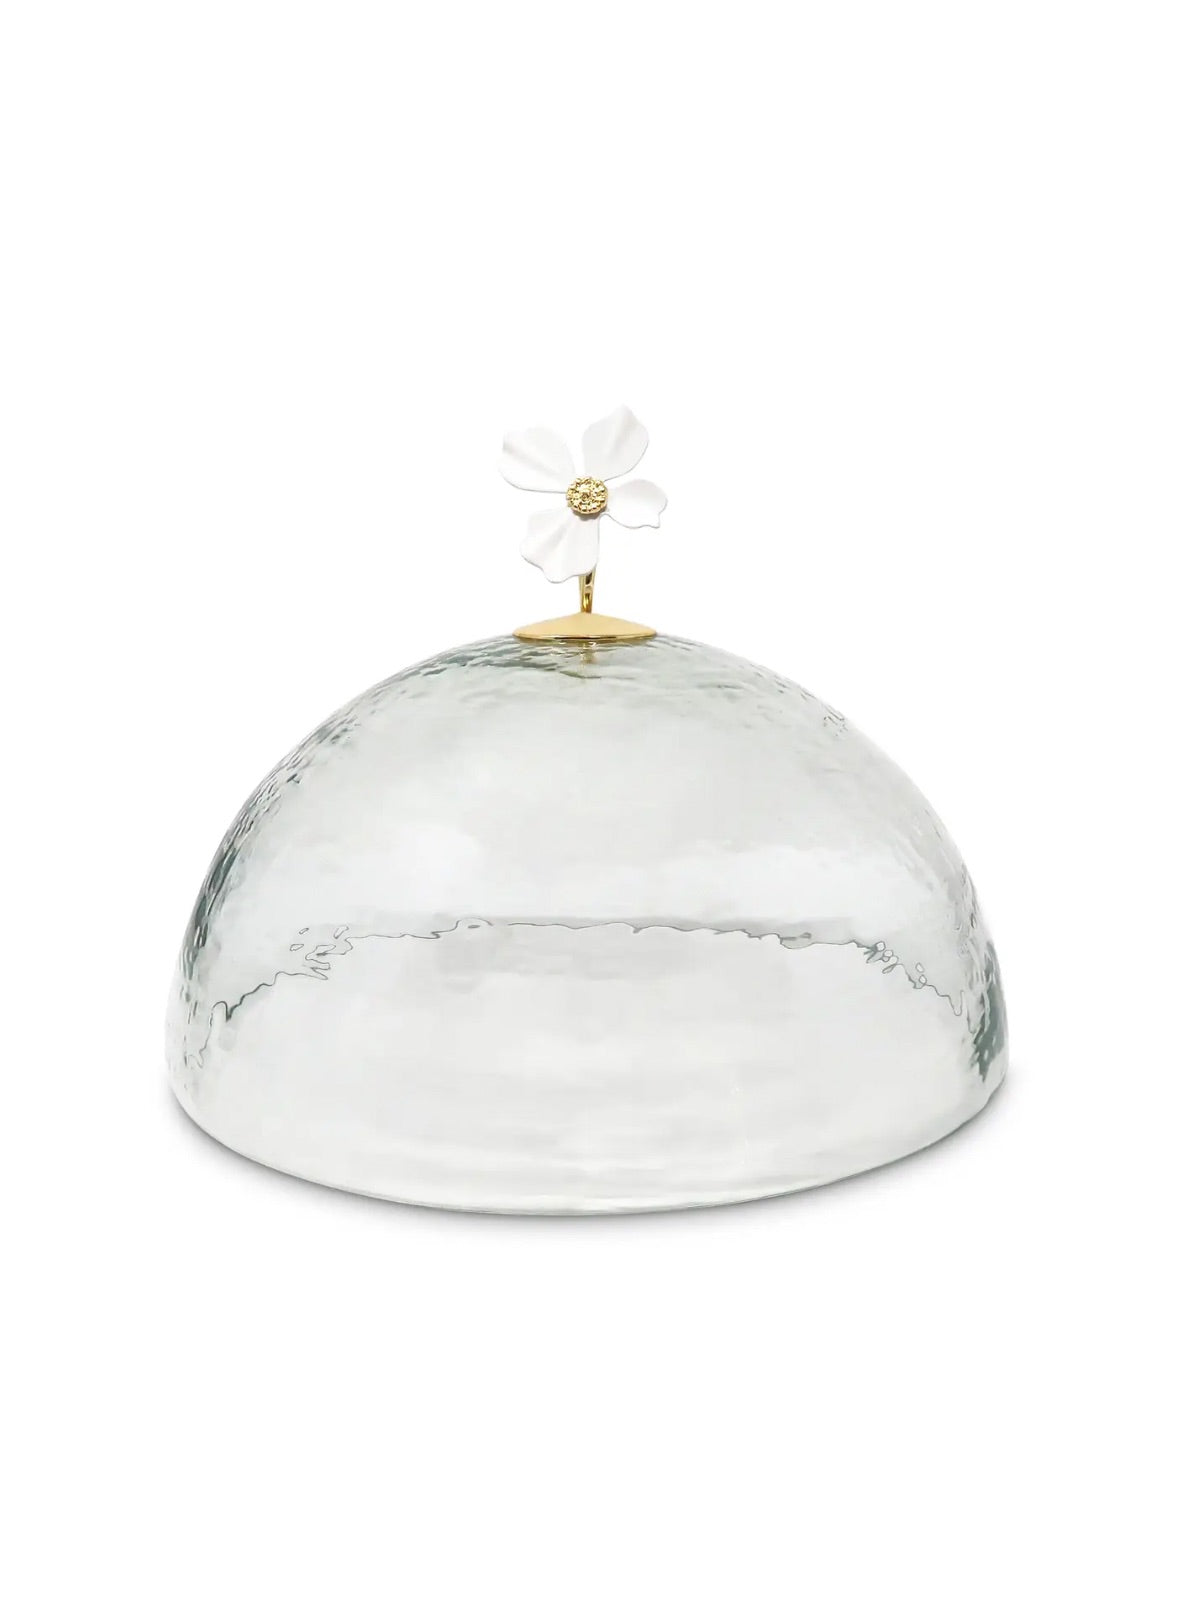 Cake Stand Glass Cover with Jewel Flower Embellishment - Sold by KYA Home Decor.